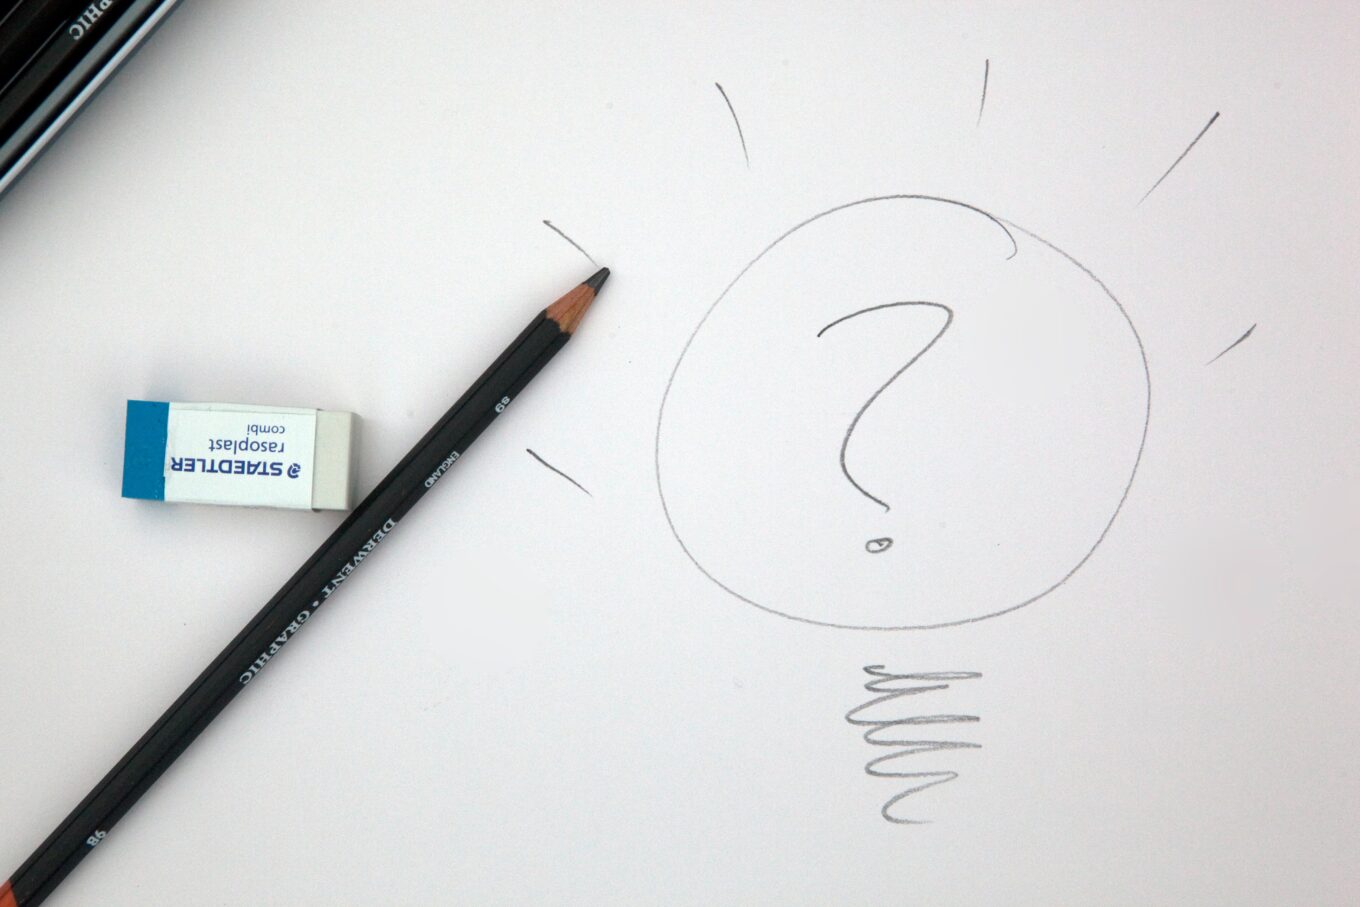 A notepad sketch of a lightbulb with a question mark inside of the bulb